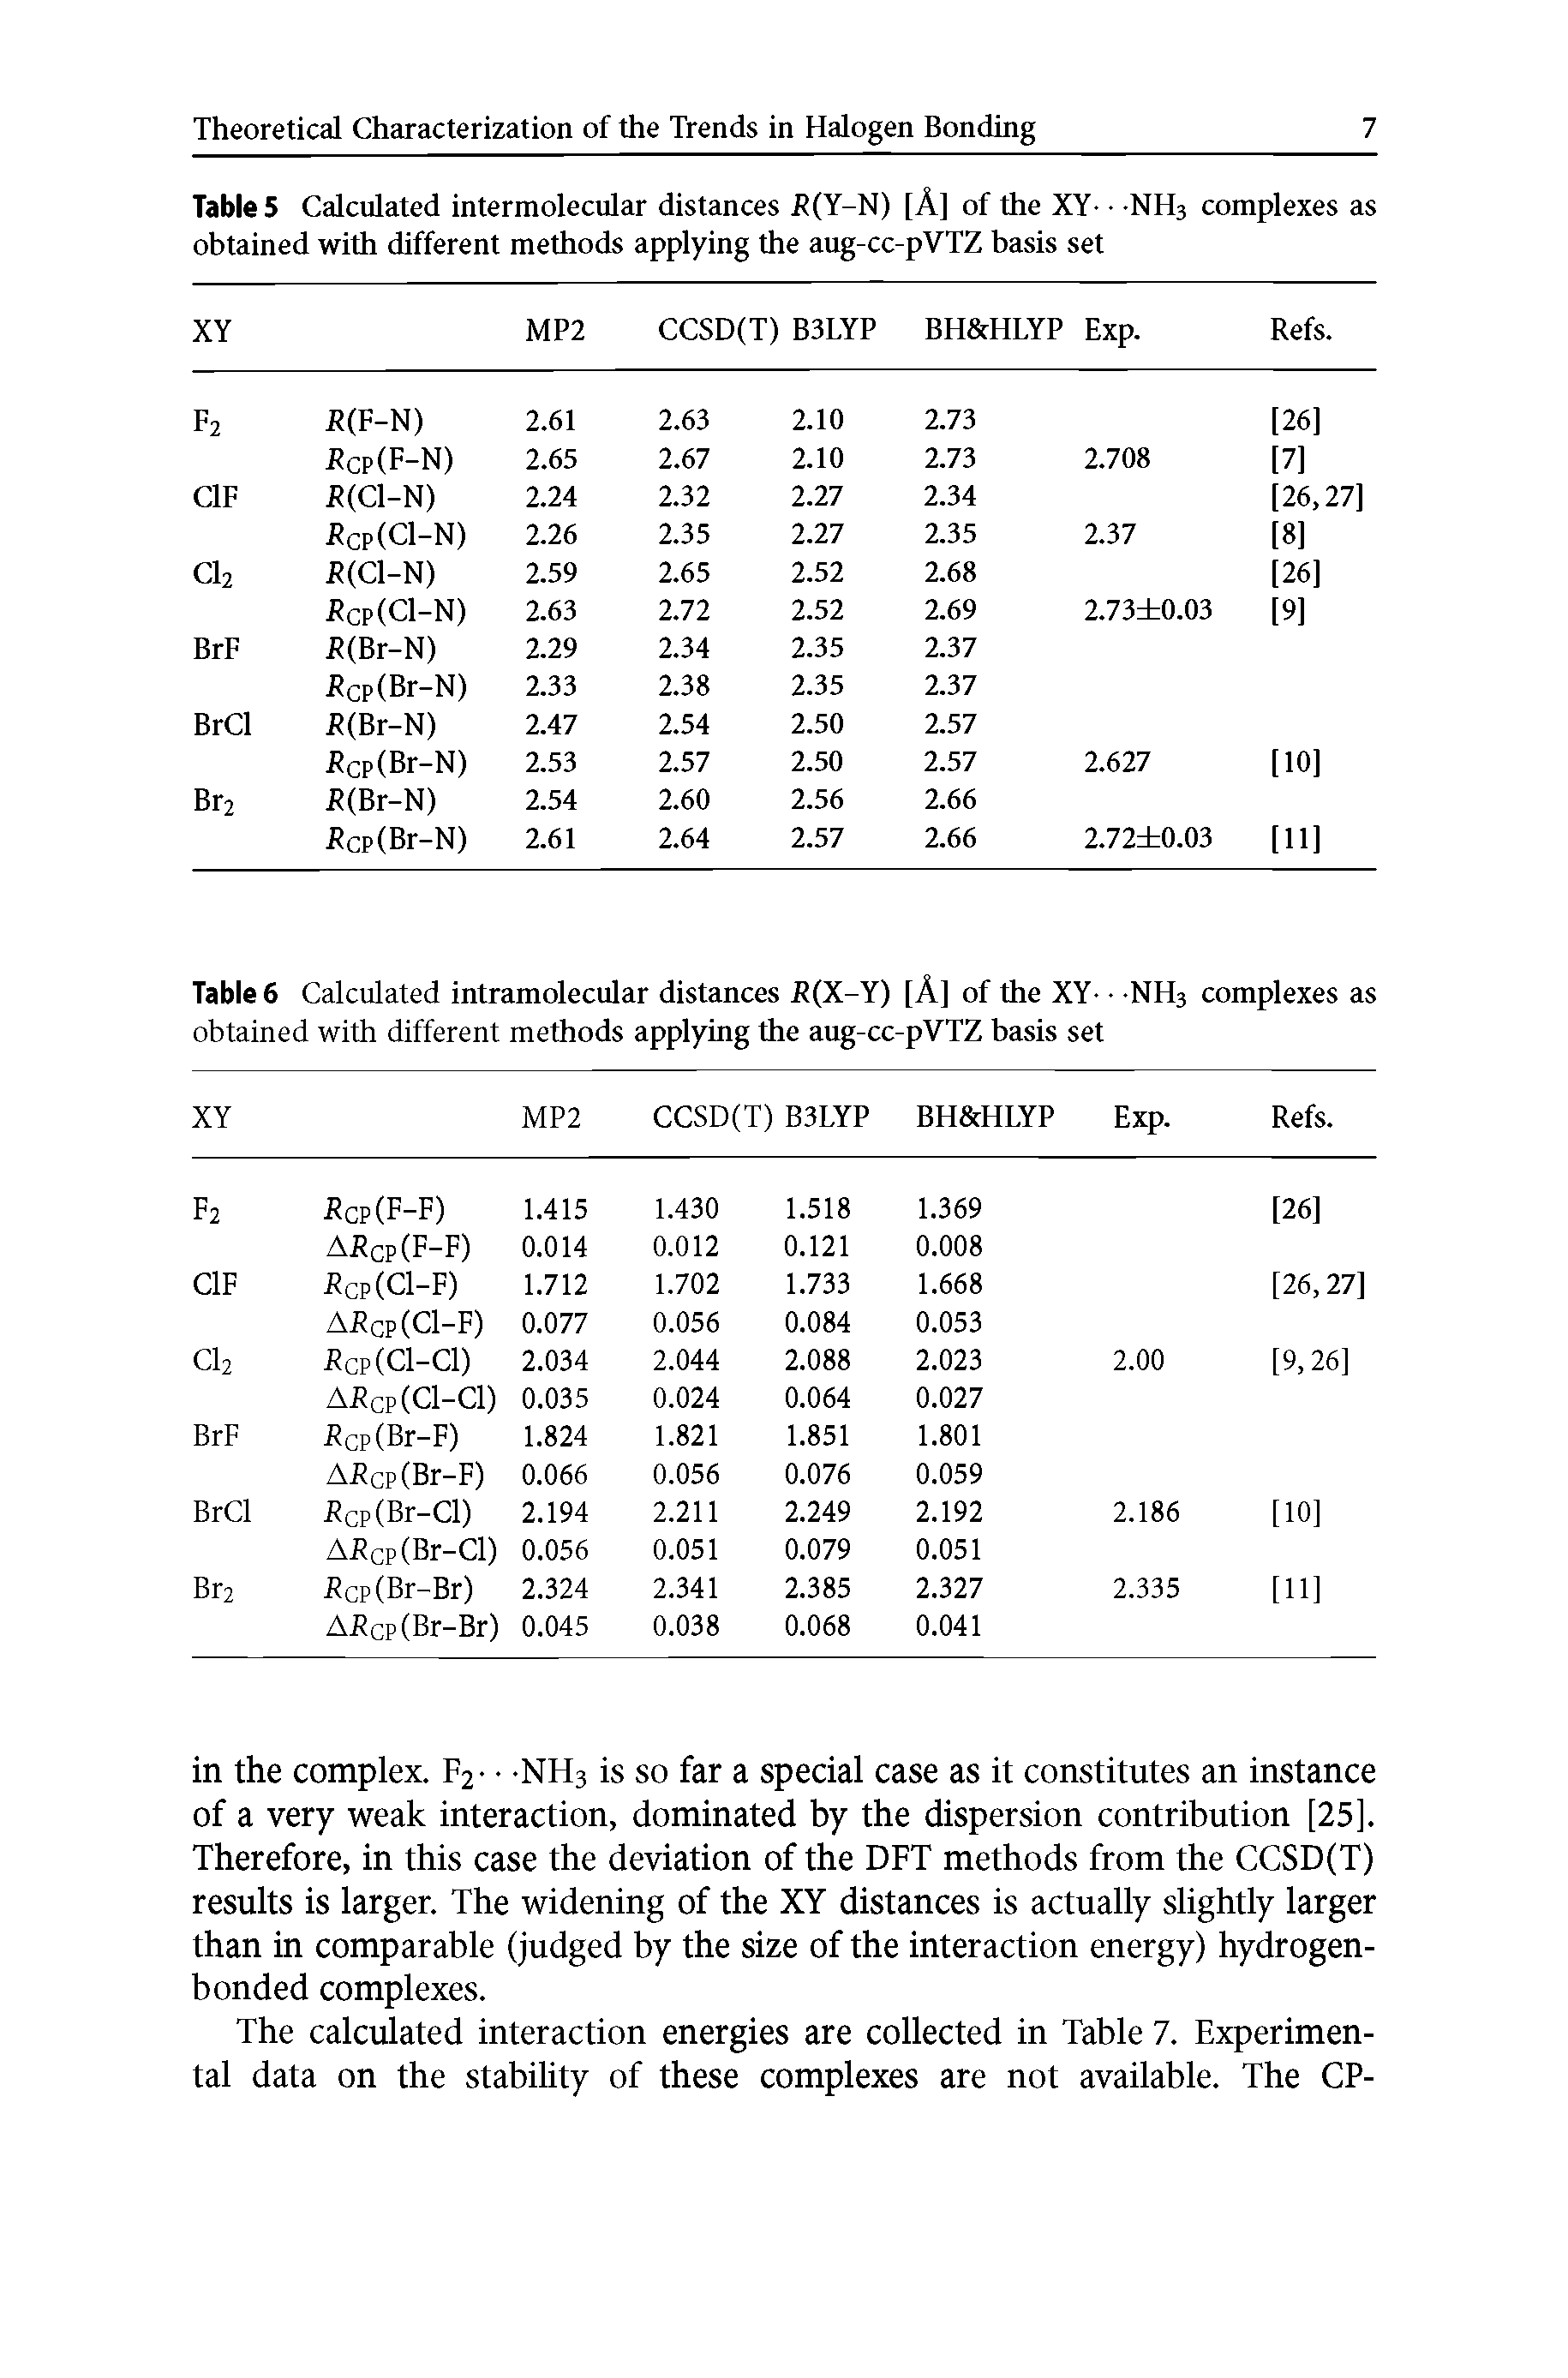 Table 5 Calculated intermolecular distances R(Y-N) [A] of the XY- NH3 complexes as obtained with different methods applying the aug-cc-pVTZ basis set ...